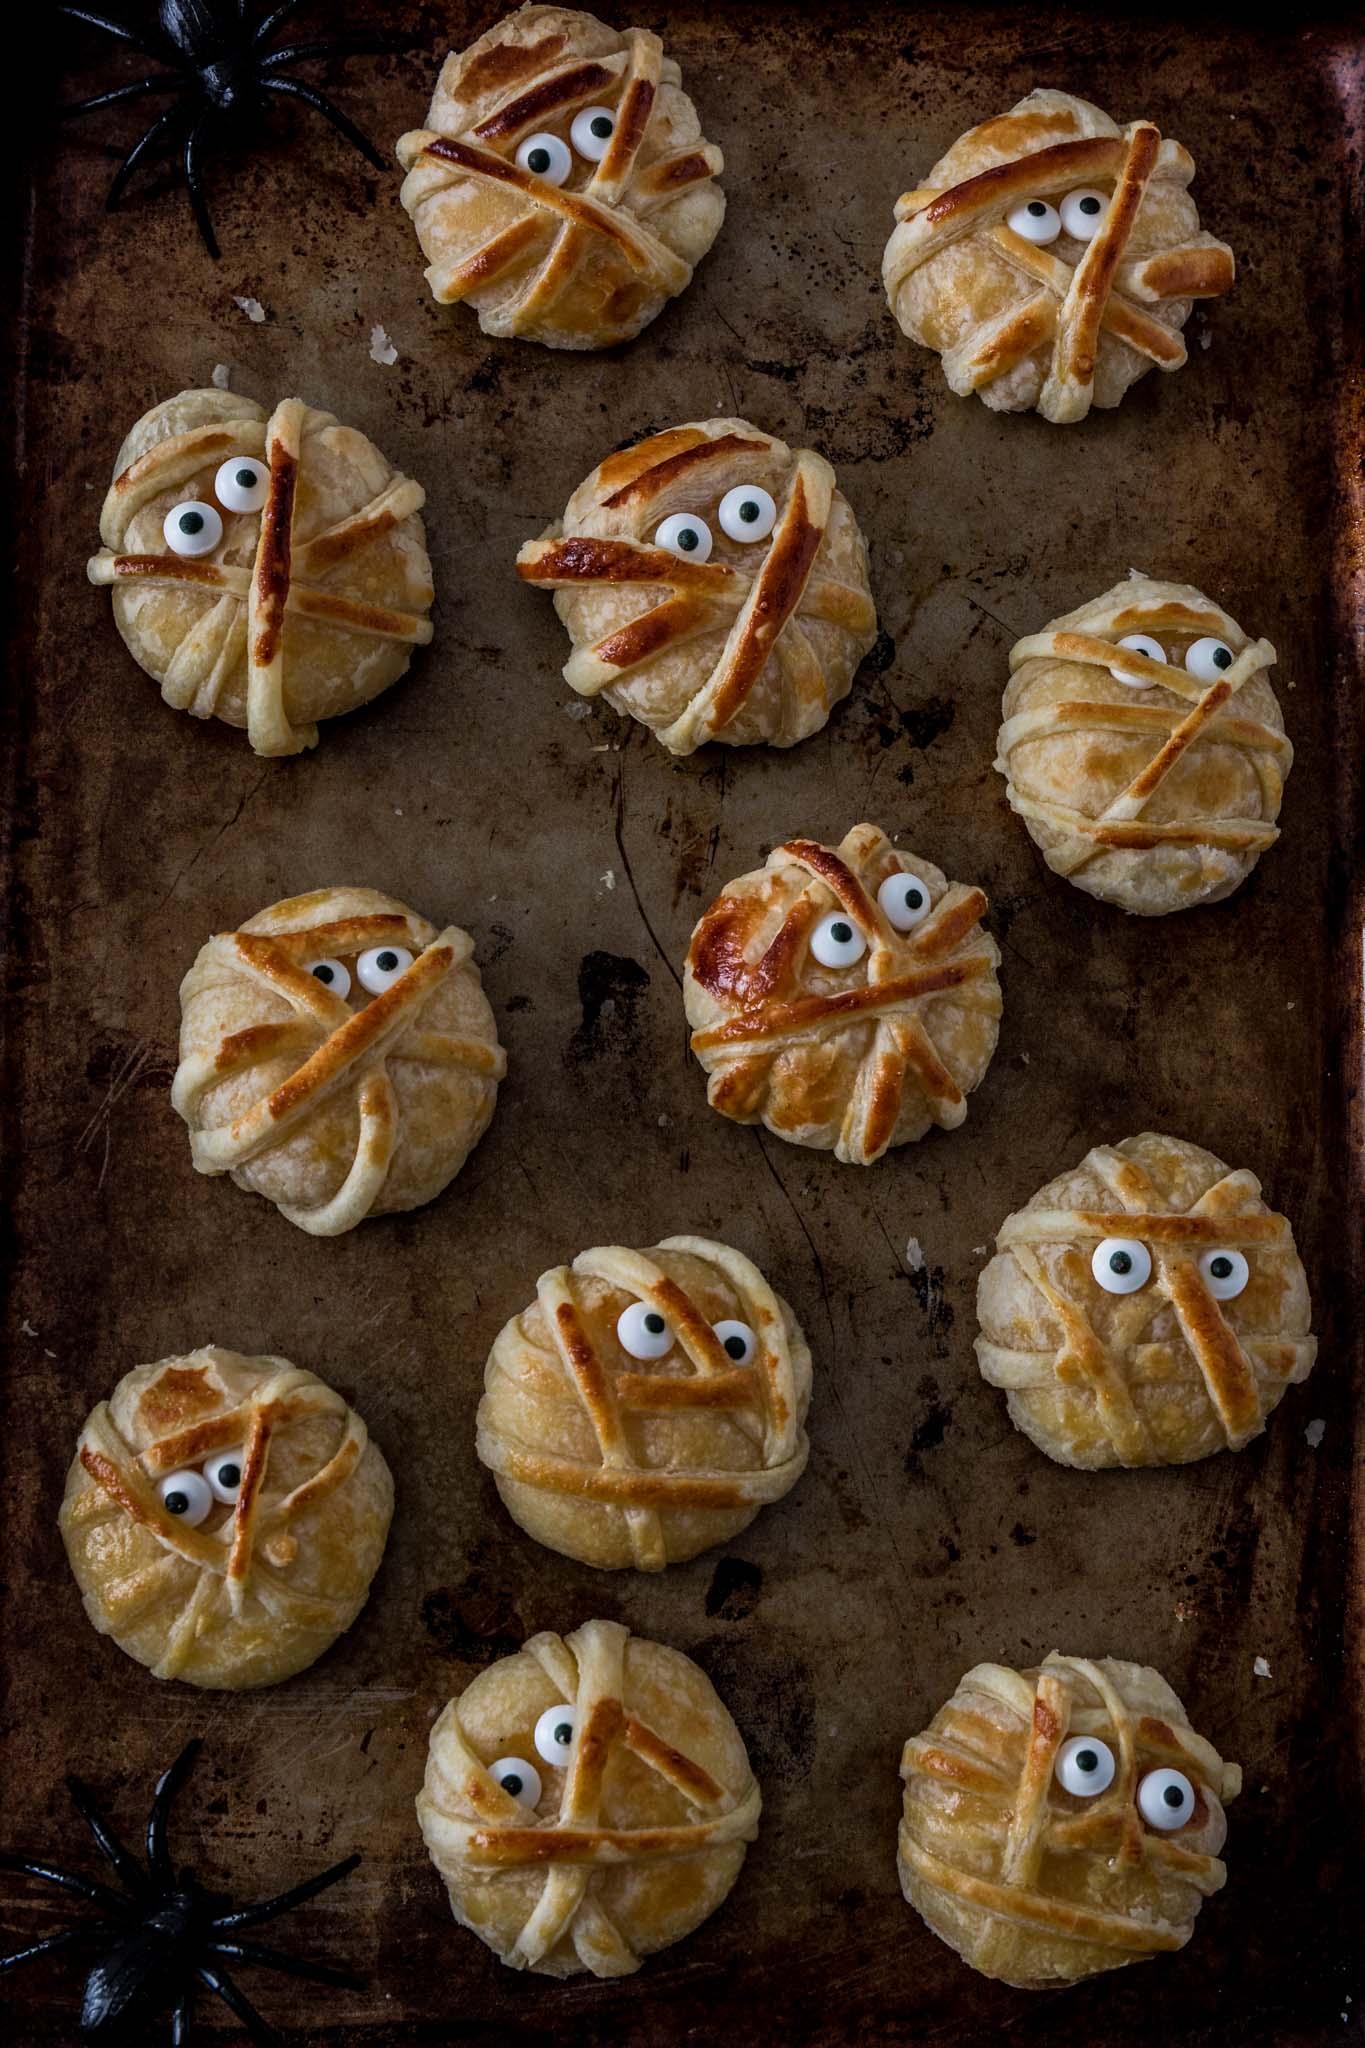 Baked Cheese Mummies | www.oliviascuisine.com | These fun puff pastry wrapped cheese mummies are not only cheesy-licious but very easy to make! They are sure to be the hit of your Halloween party! (Recipe and food photography by @oliviascuisine.)